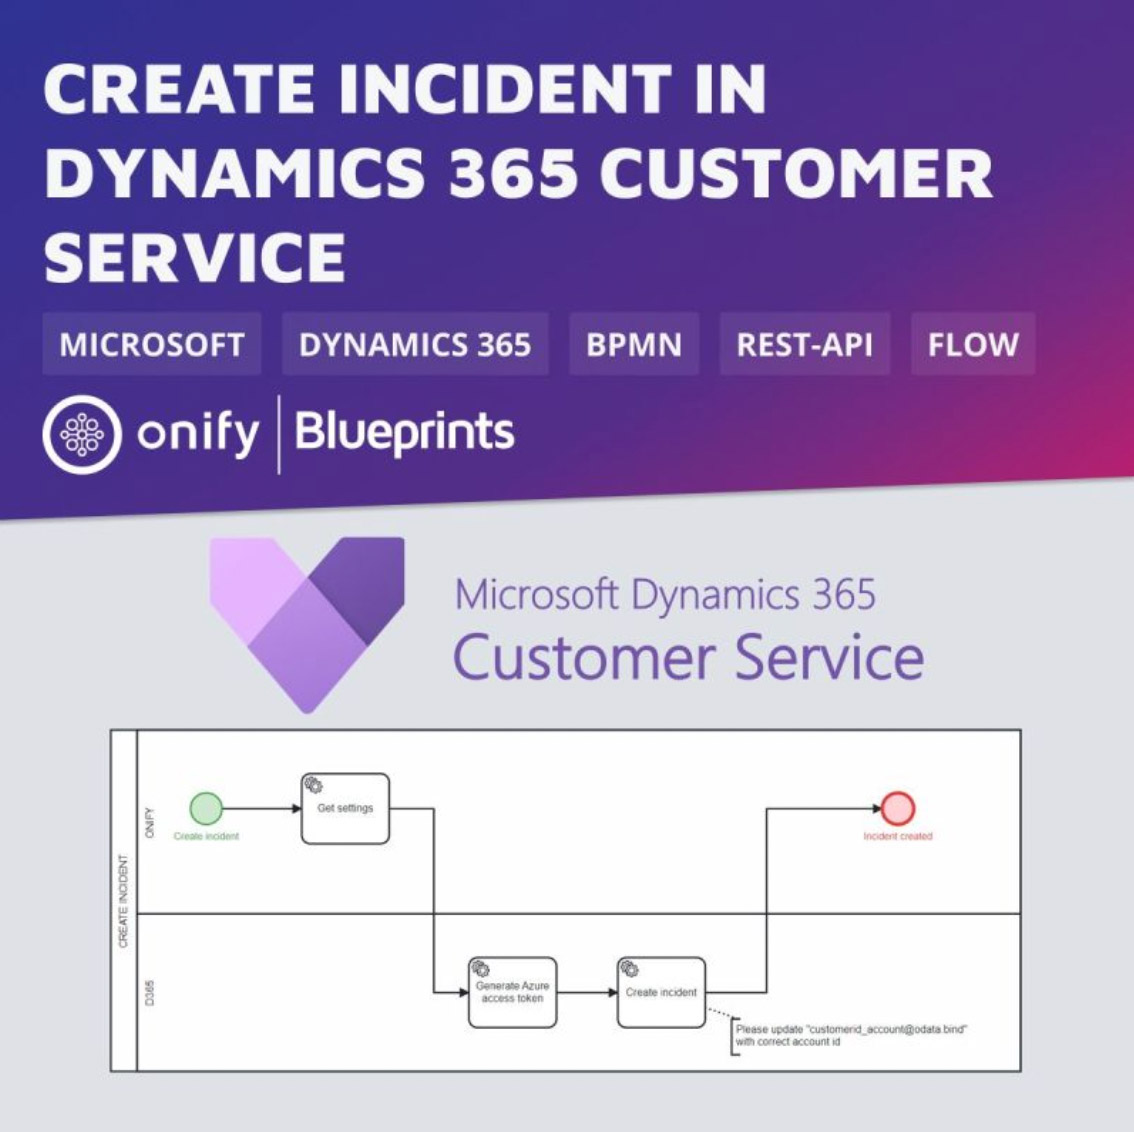 Onify Blueprint – Create incident in Dynamics 365 Customer Service